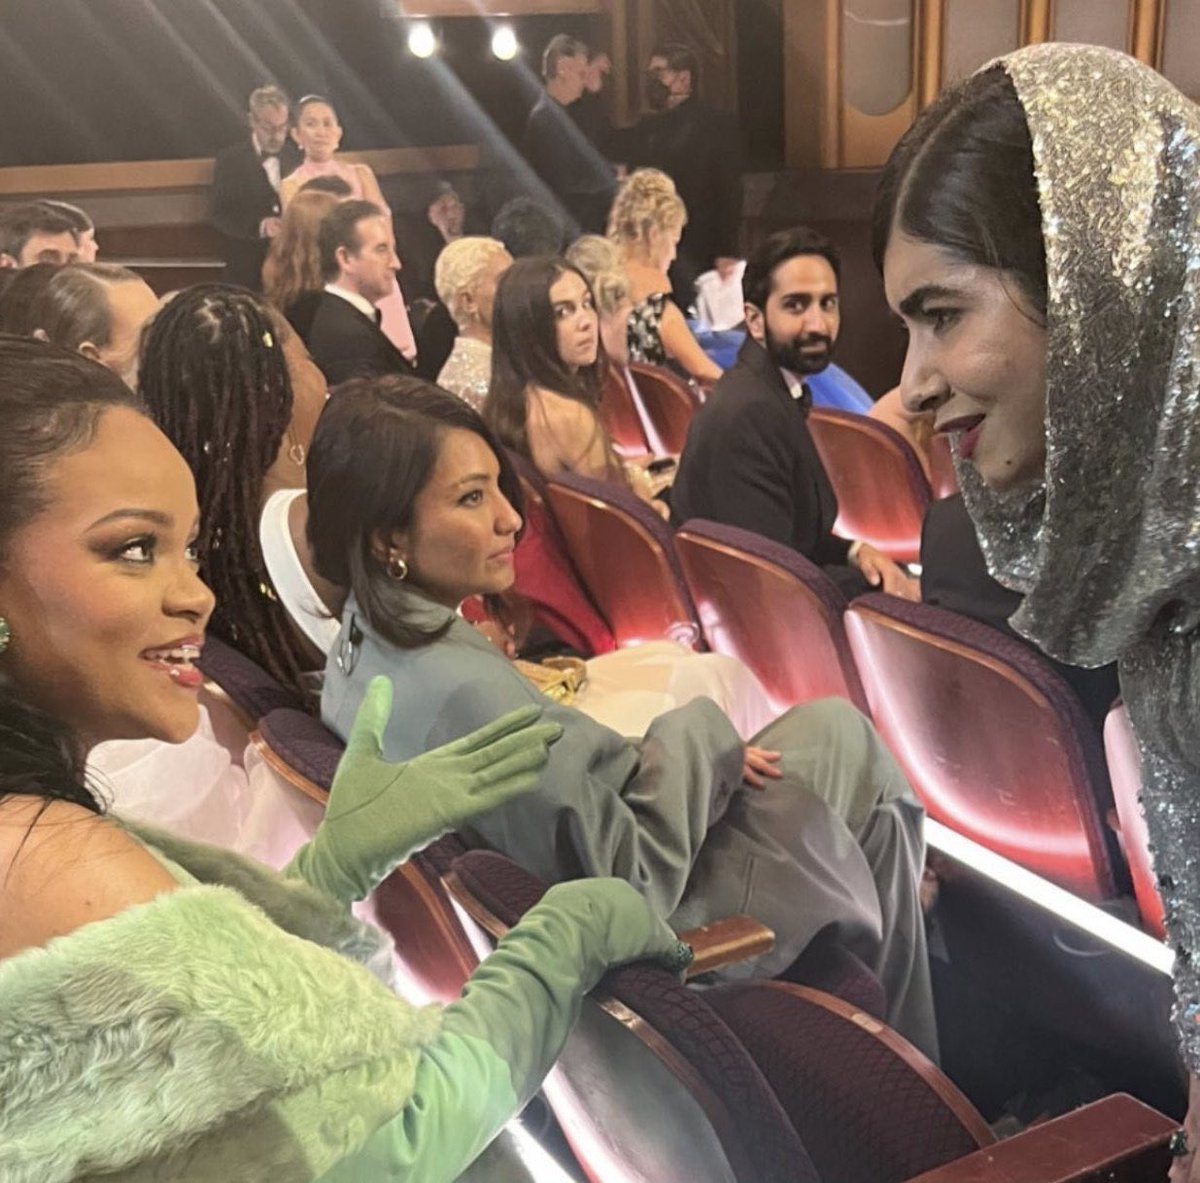 Two farmers #Oscar discussing the agricultural issues in India and plight of our ann-data

#Rhianna #MalalaYousafzai 

PS: Malal isn't wearing the dress code that she is supposed to 😂